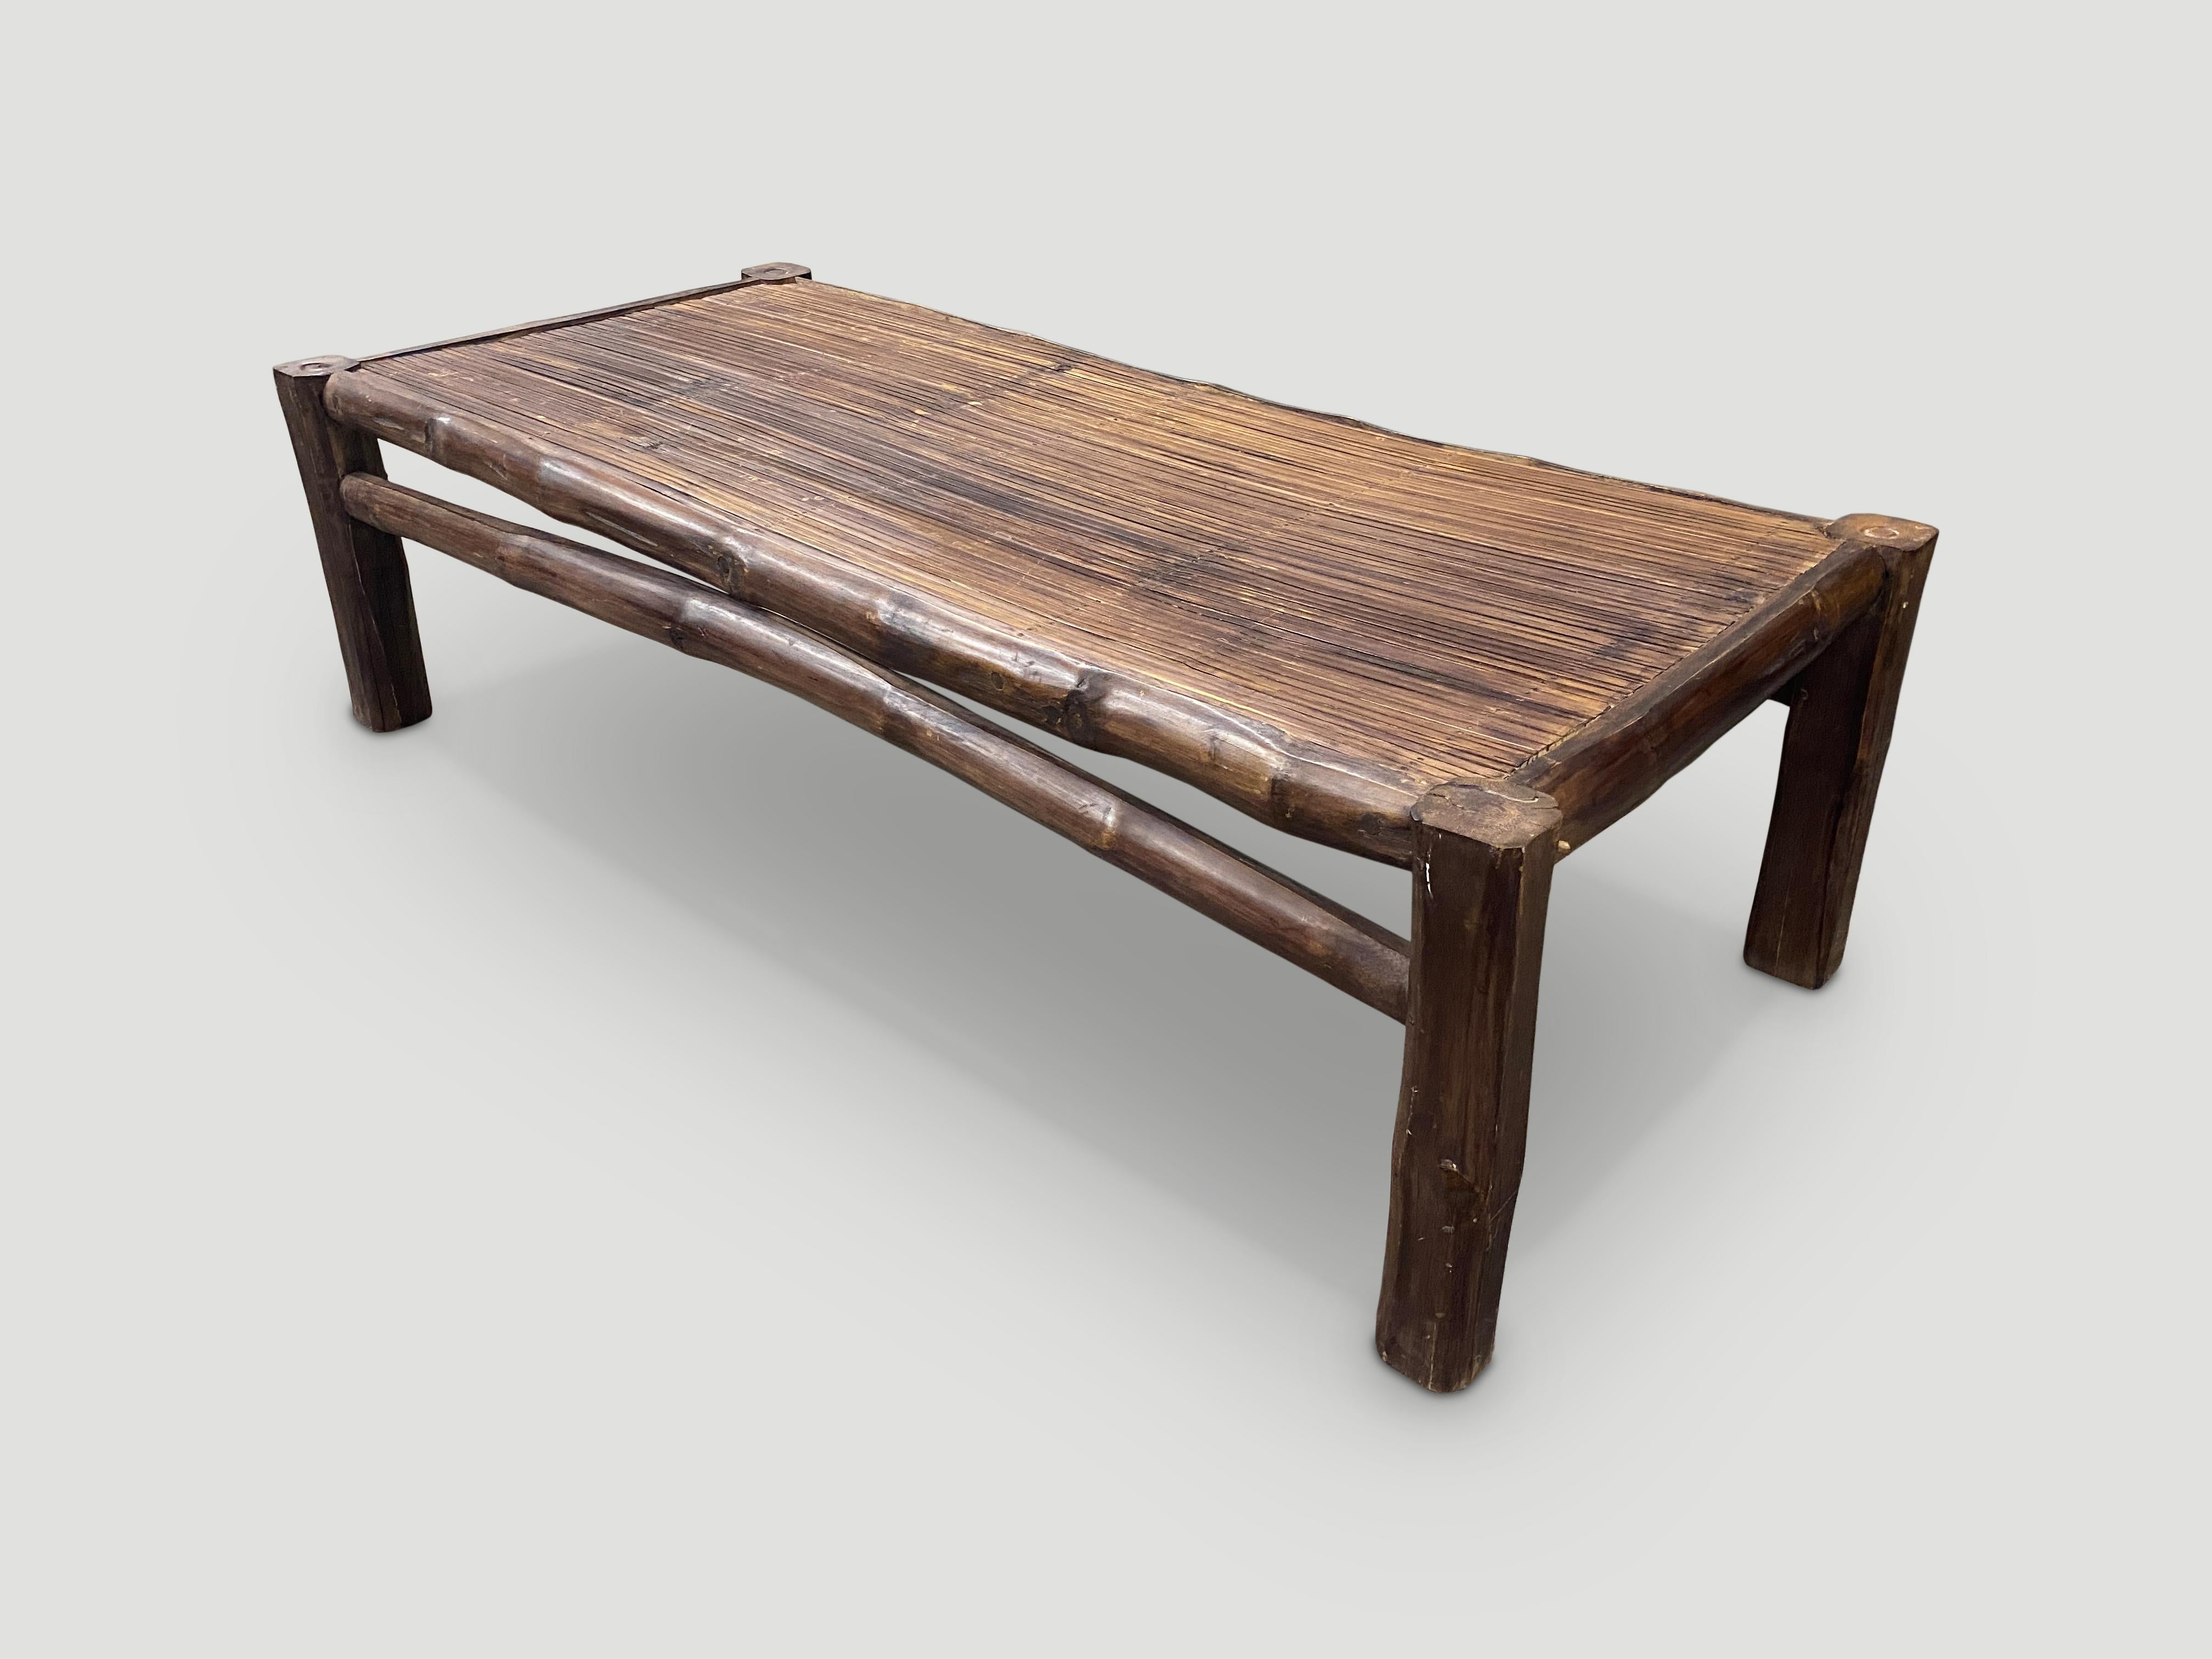 Andrianna Shamaris Handmade Bamboo Coffee Table In Excellent Condition For Sale In New York, NY